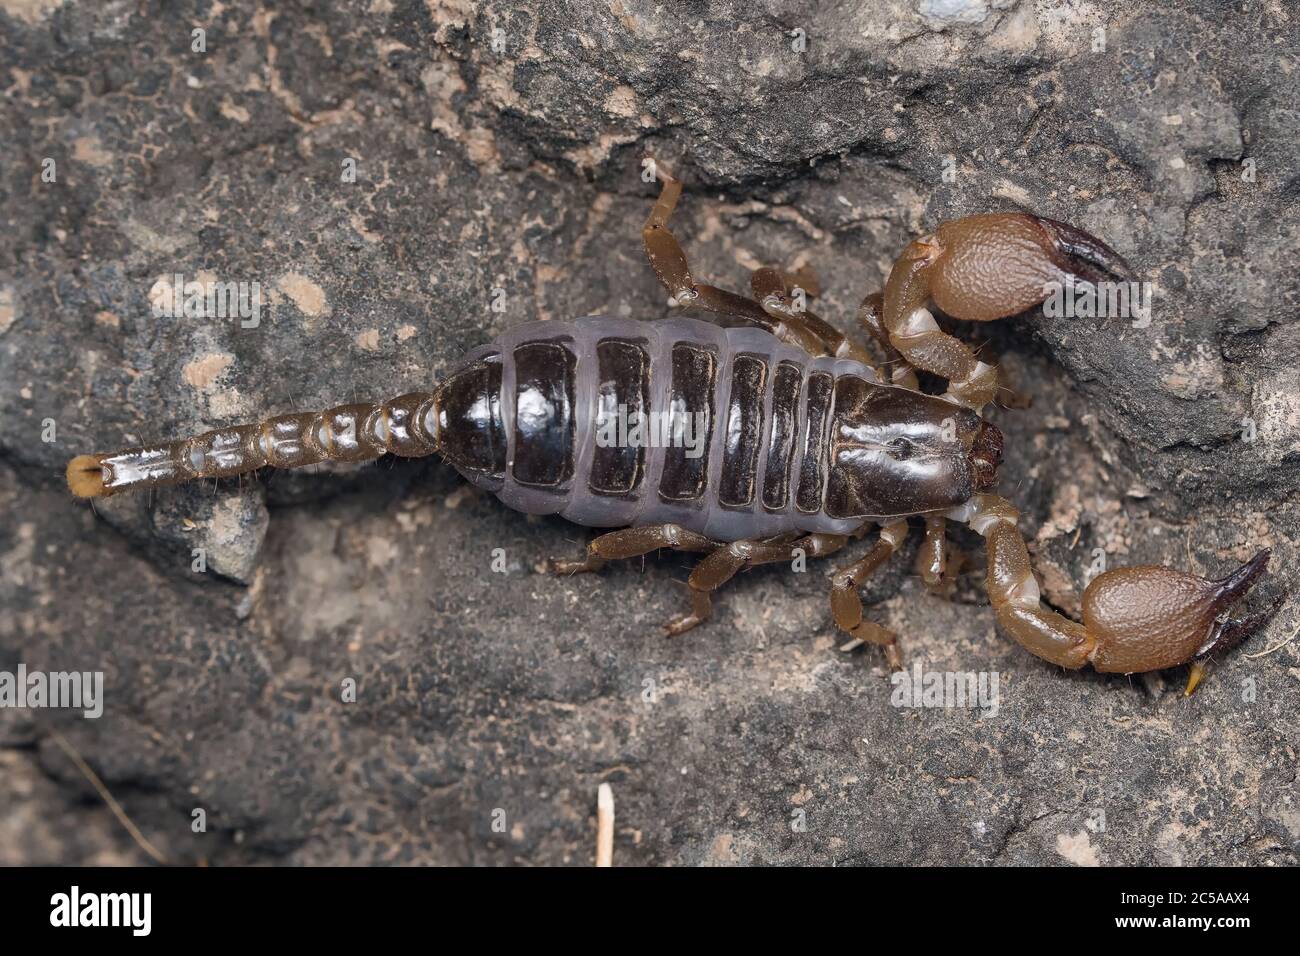 Pregnant scorpion resting on a rock. Stock Photo